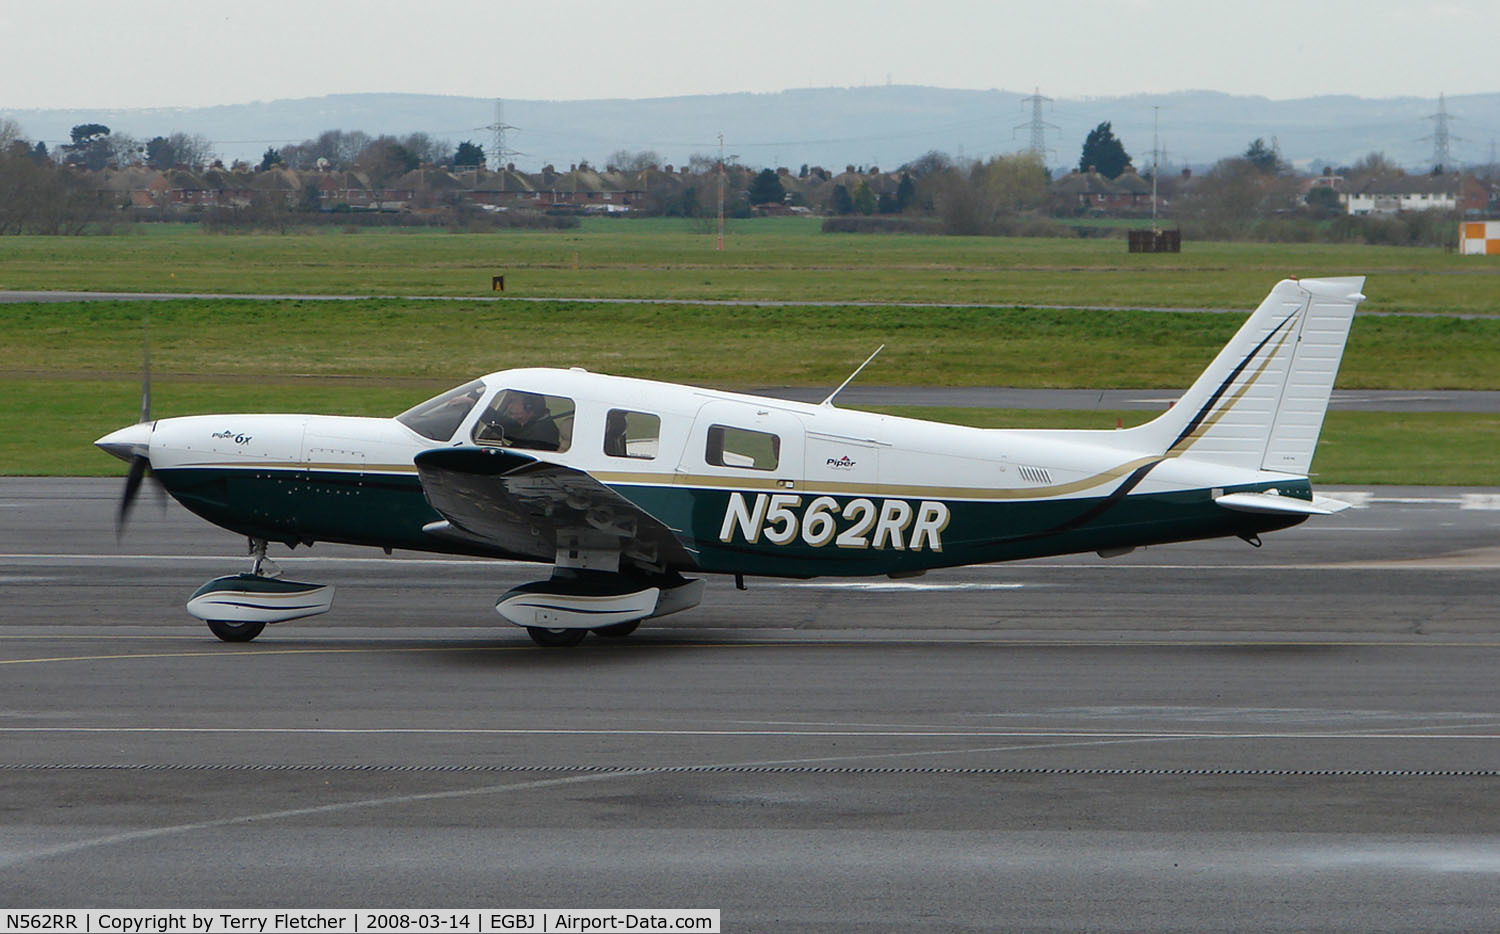 N562RR, 2004 Piper PA-32-301FT 6X Saratoga Saratoga C/N 3232021, A visitor to Gloucestershire Airport on the day of the horse racing Gold Cup  at the nearby Cheltenham Racecourse